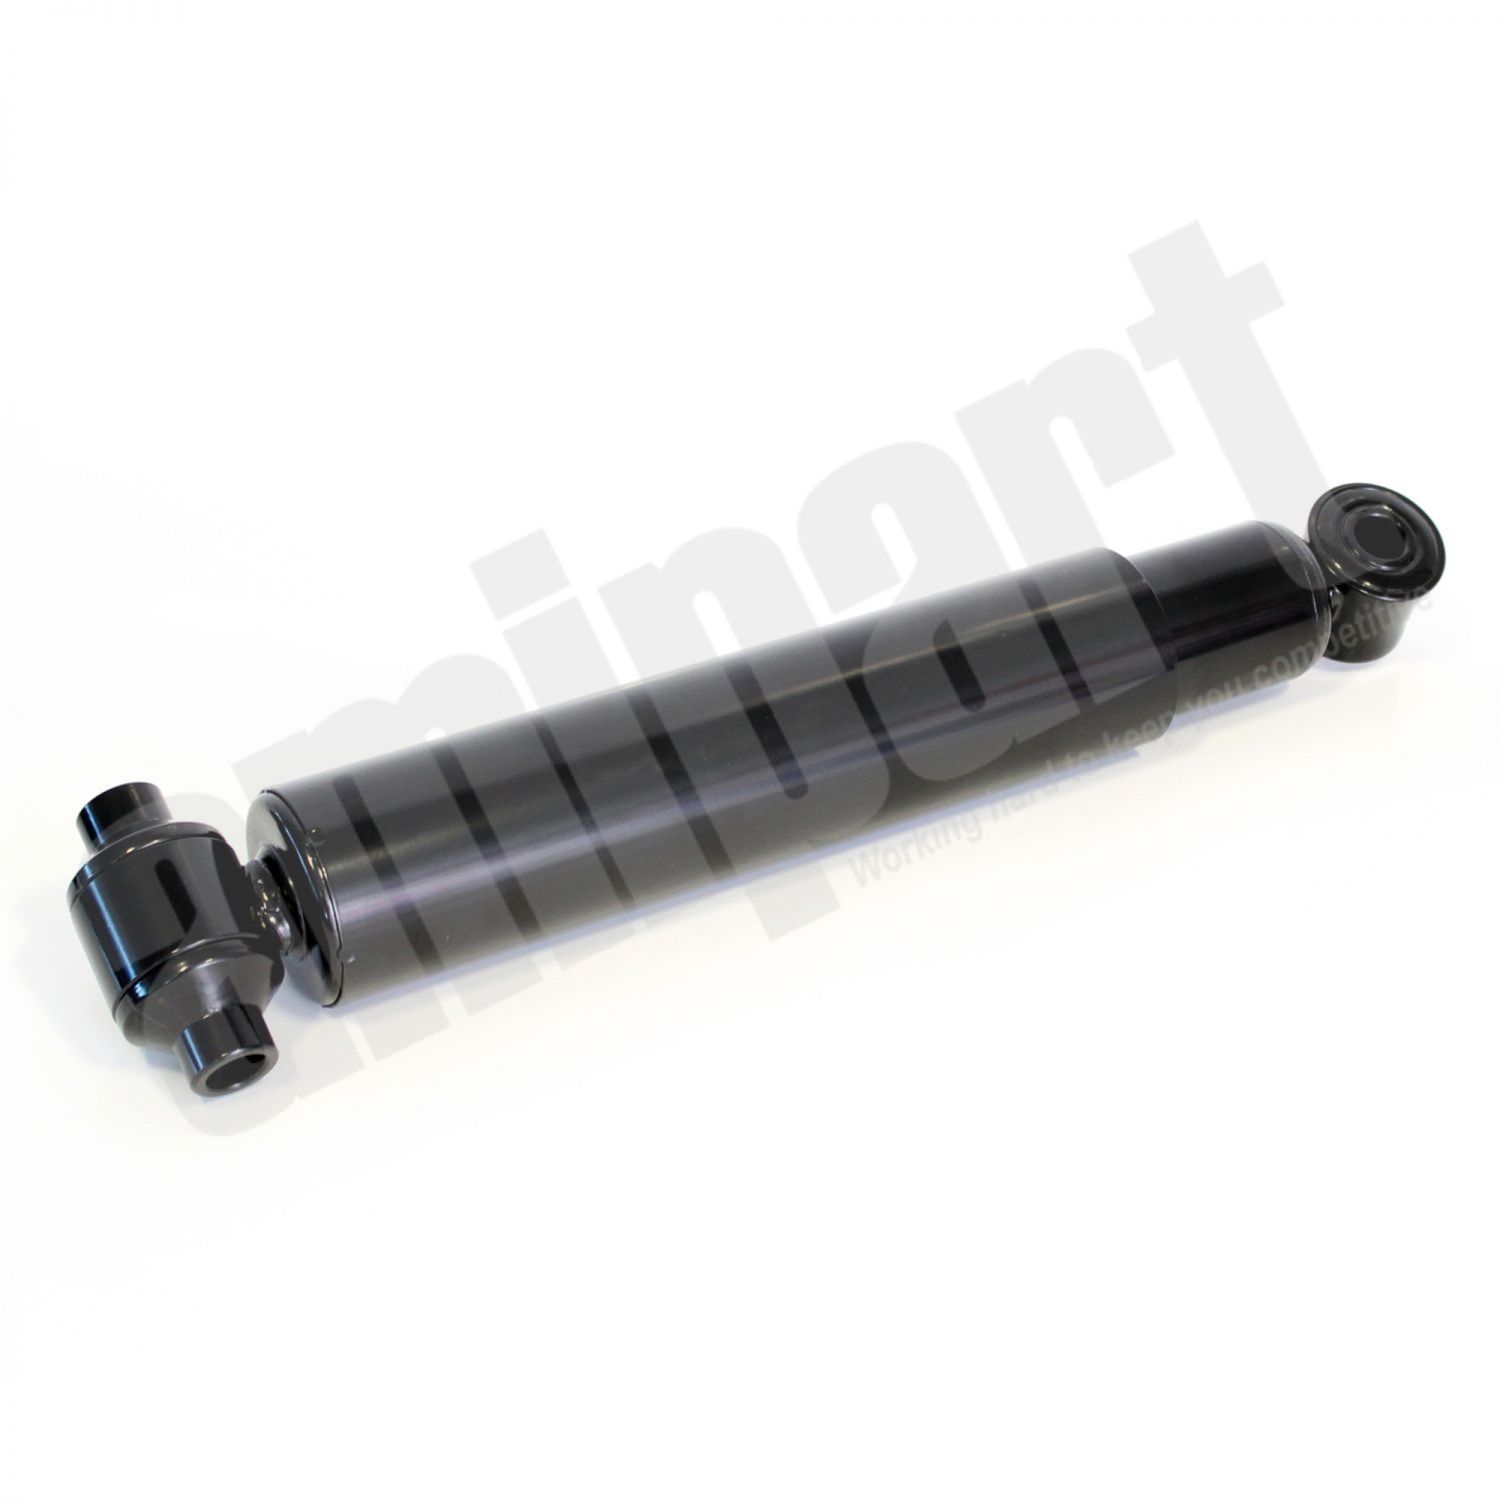 Amipart - VOLVO/RENAULT SHOCK ABSORBER